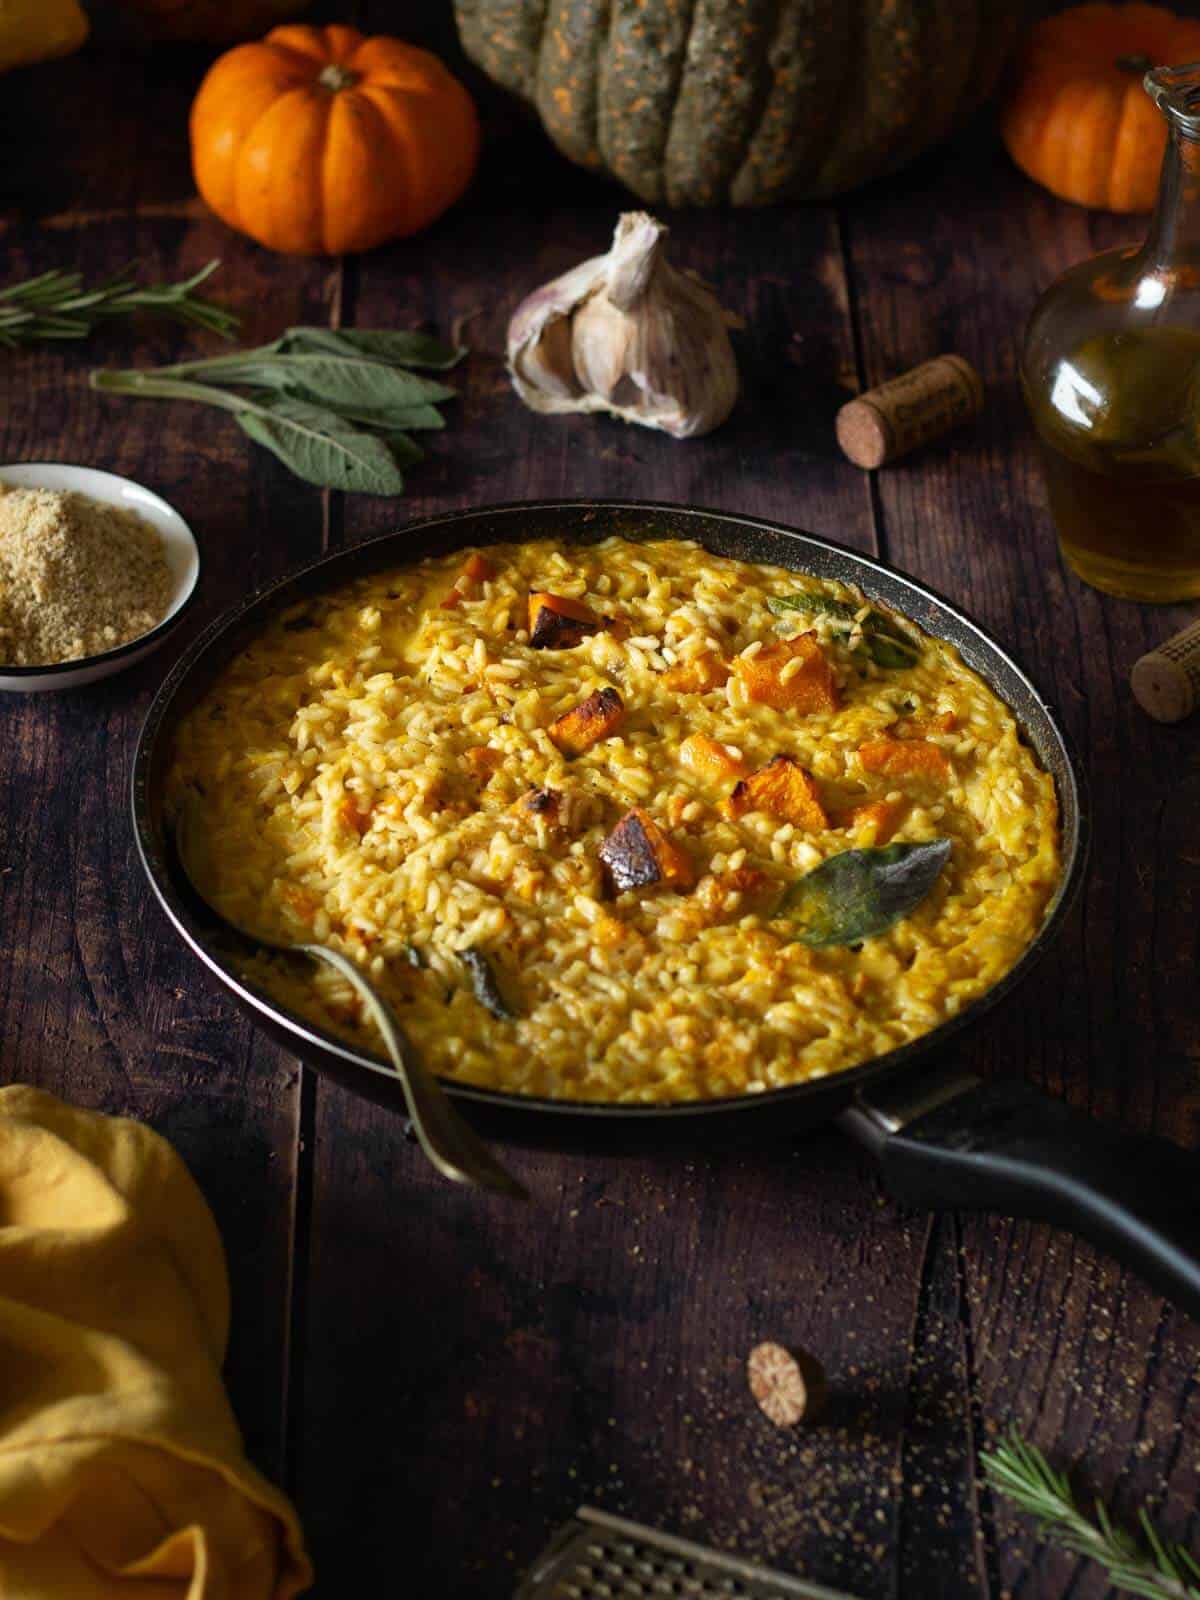 45 degrees view of roasted pumpkin risotto on a wooden table